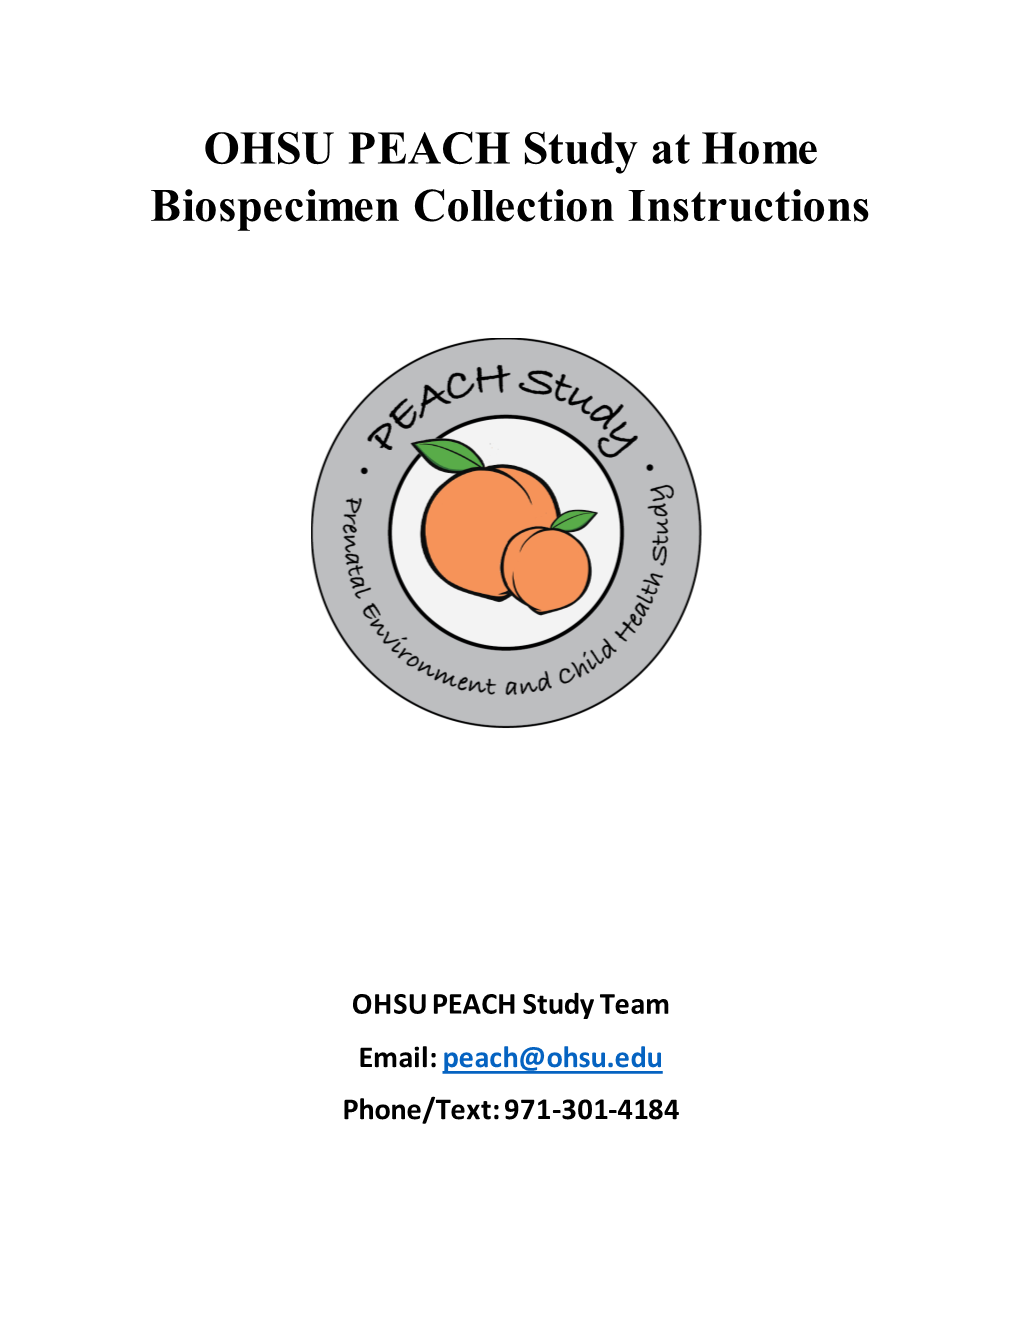 OHSU PEACH Study at Home Biospecimen Collection Instructions